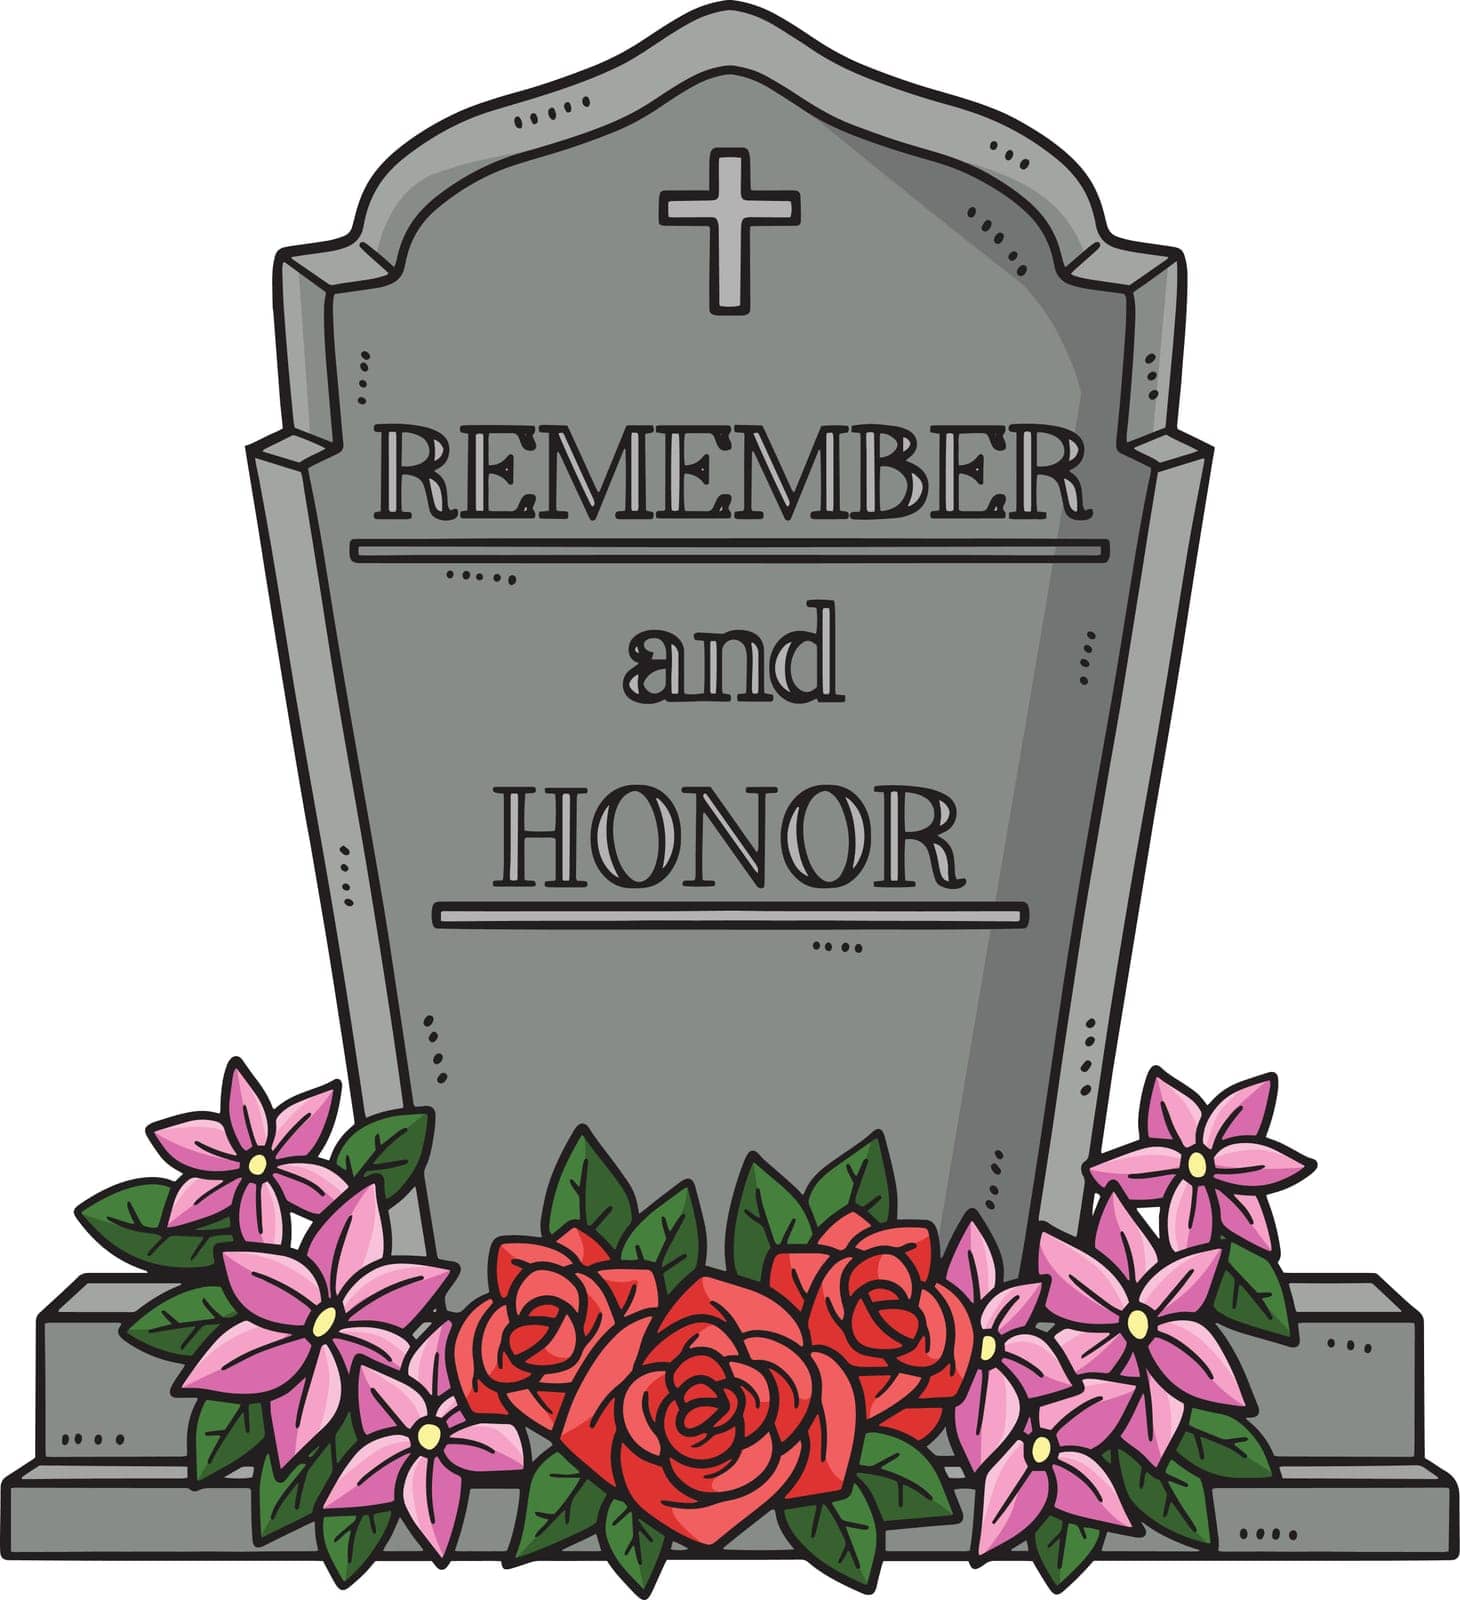 In Loving Memory with Flowers Cartoon Clipart by abbydesign